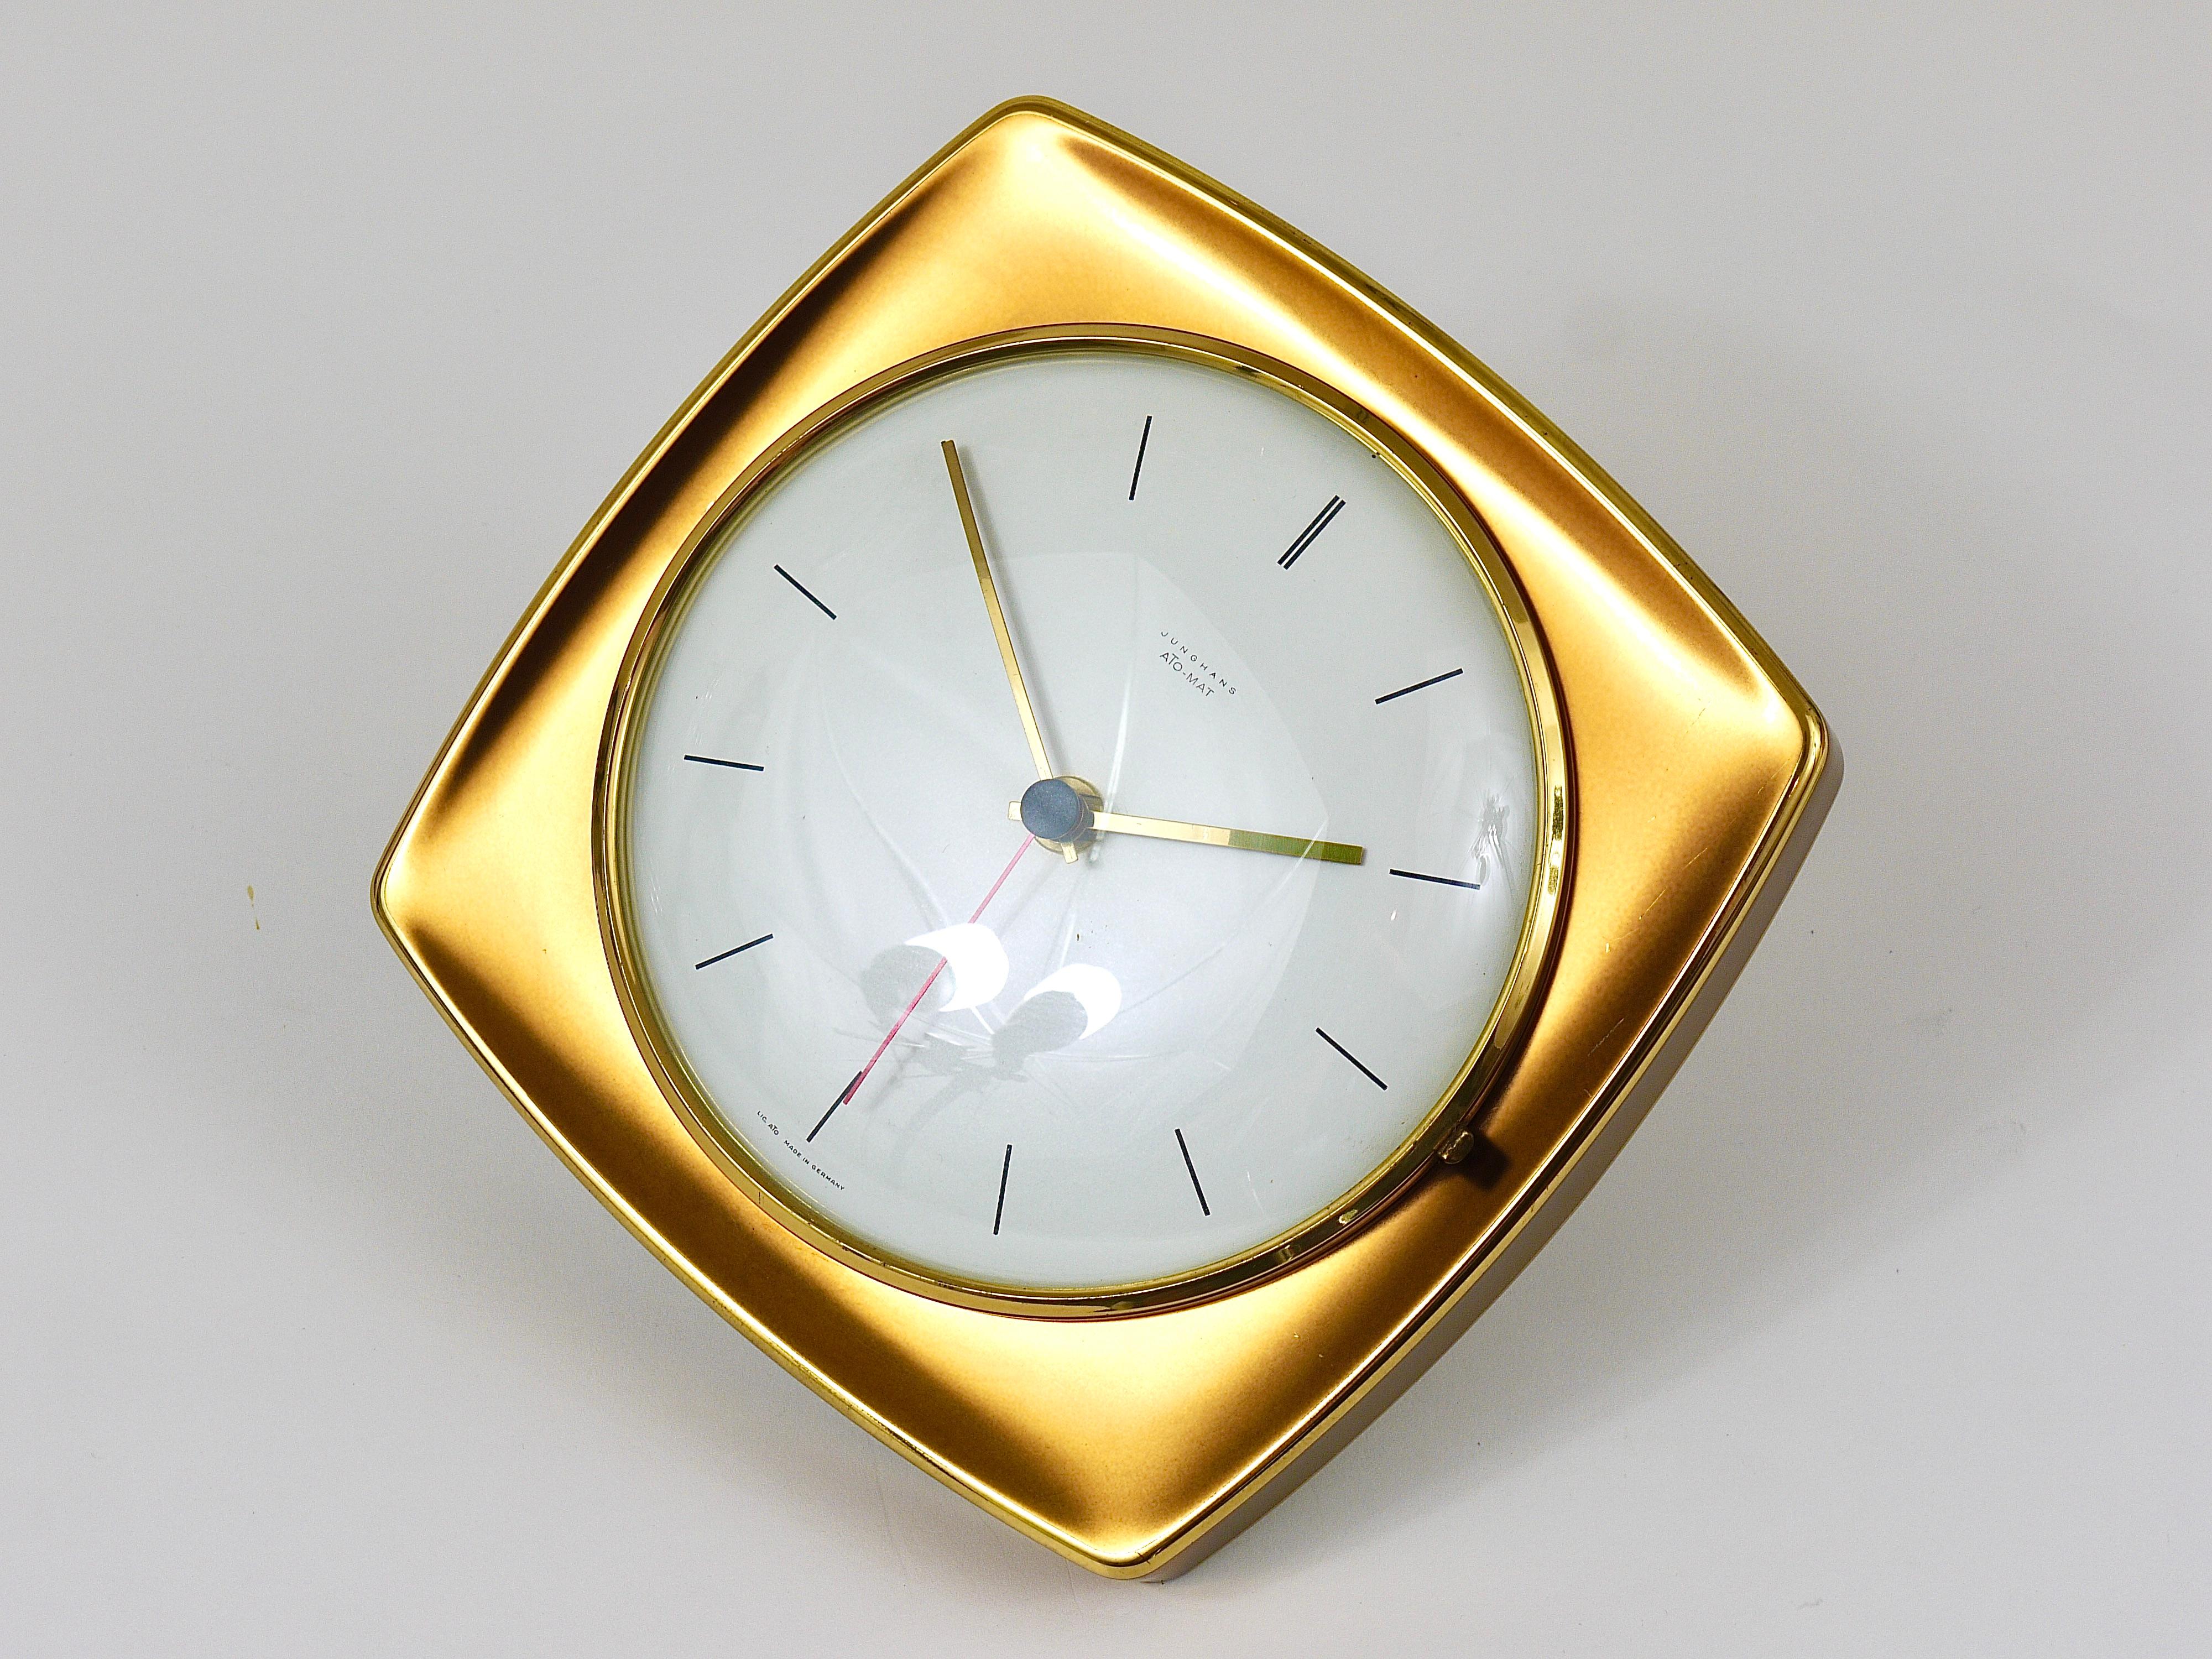 A beautiful square modernist brass wall clock in the style of Max Bill, executed in the 1950s by Junghans Germany. An elegant and decorative piece with a square golden metal housing, which ist partly polished. A nice straight clocks face and handles